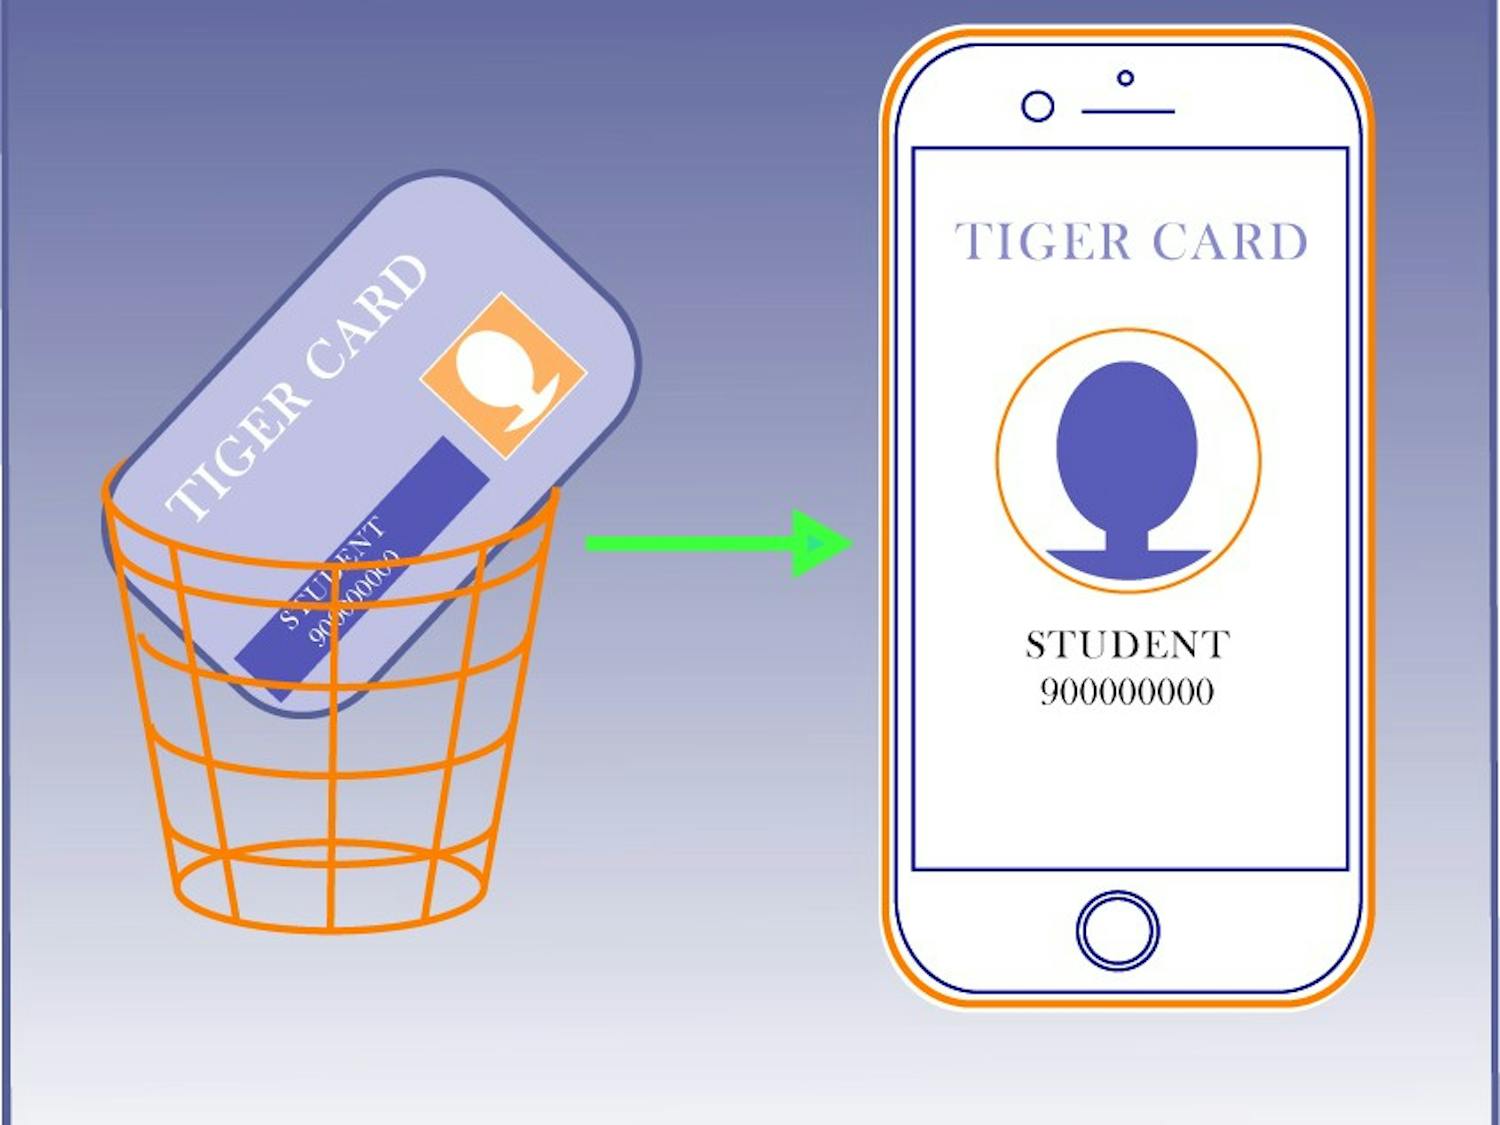 A newer, smarter TigerCard would decrease&nbsp;hassle for students.